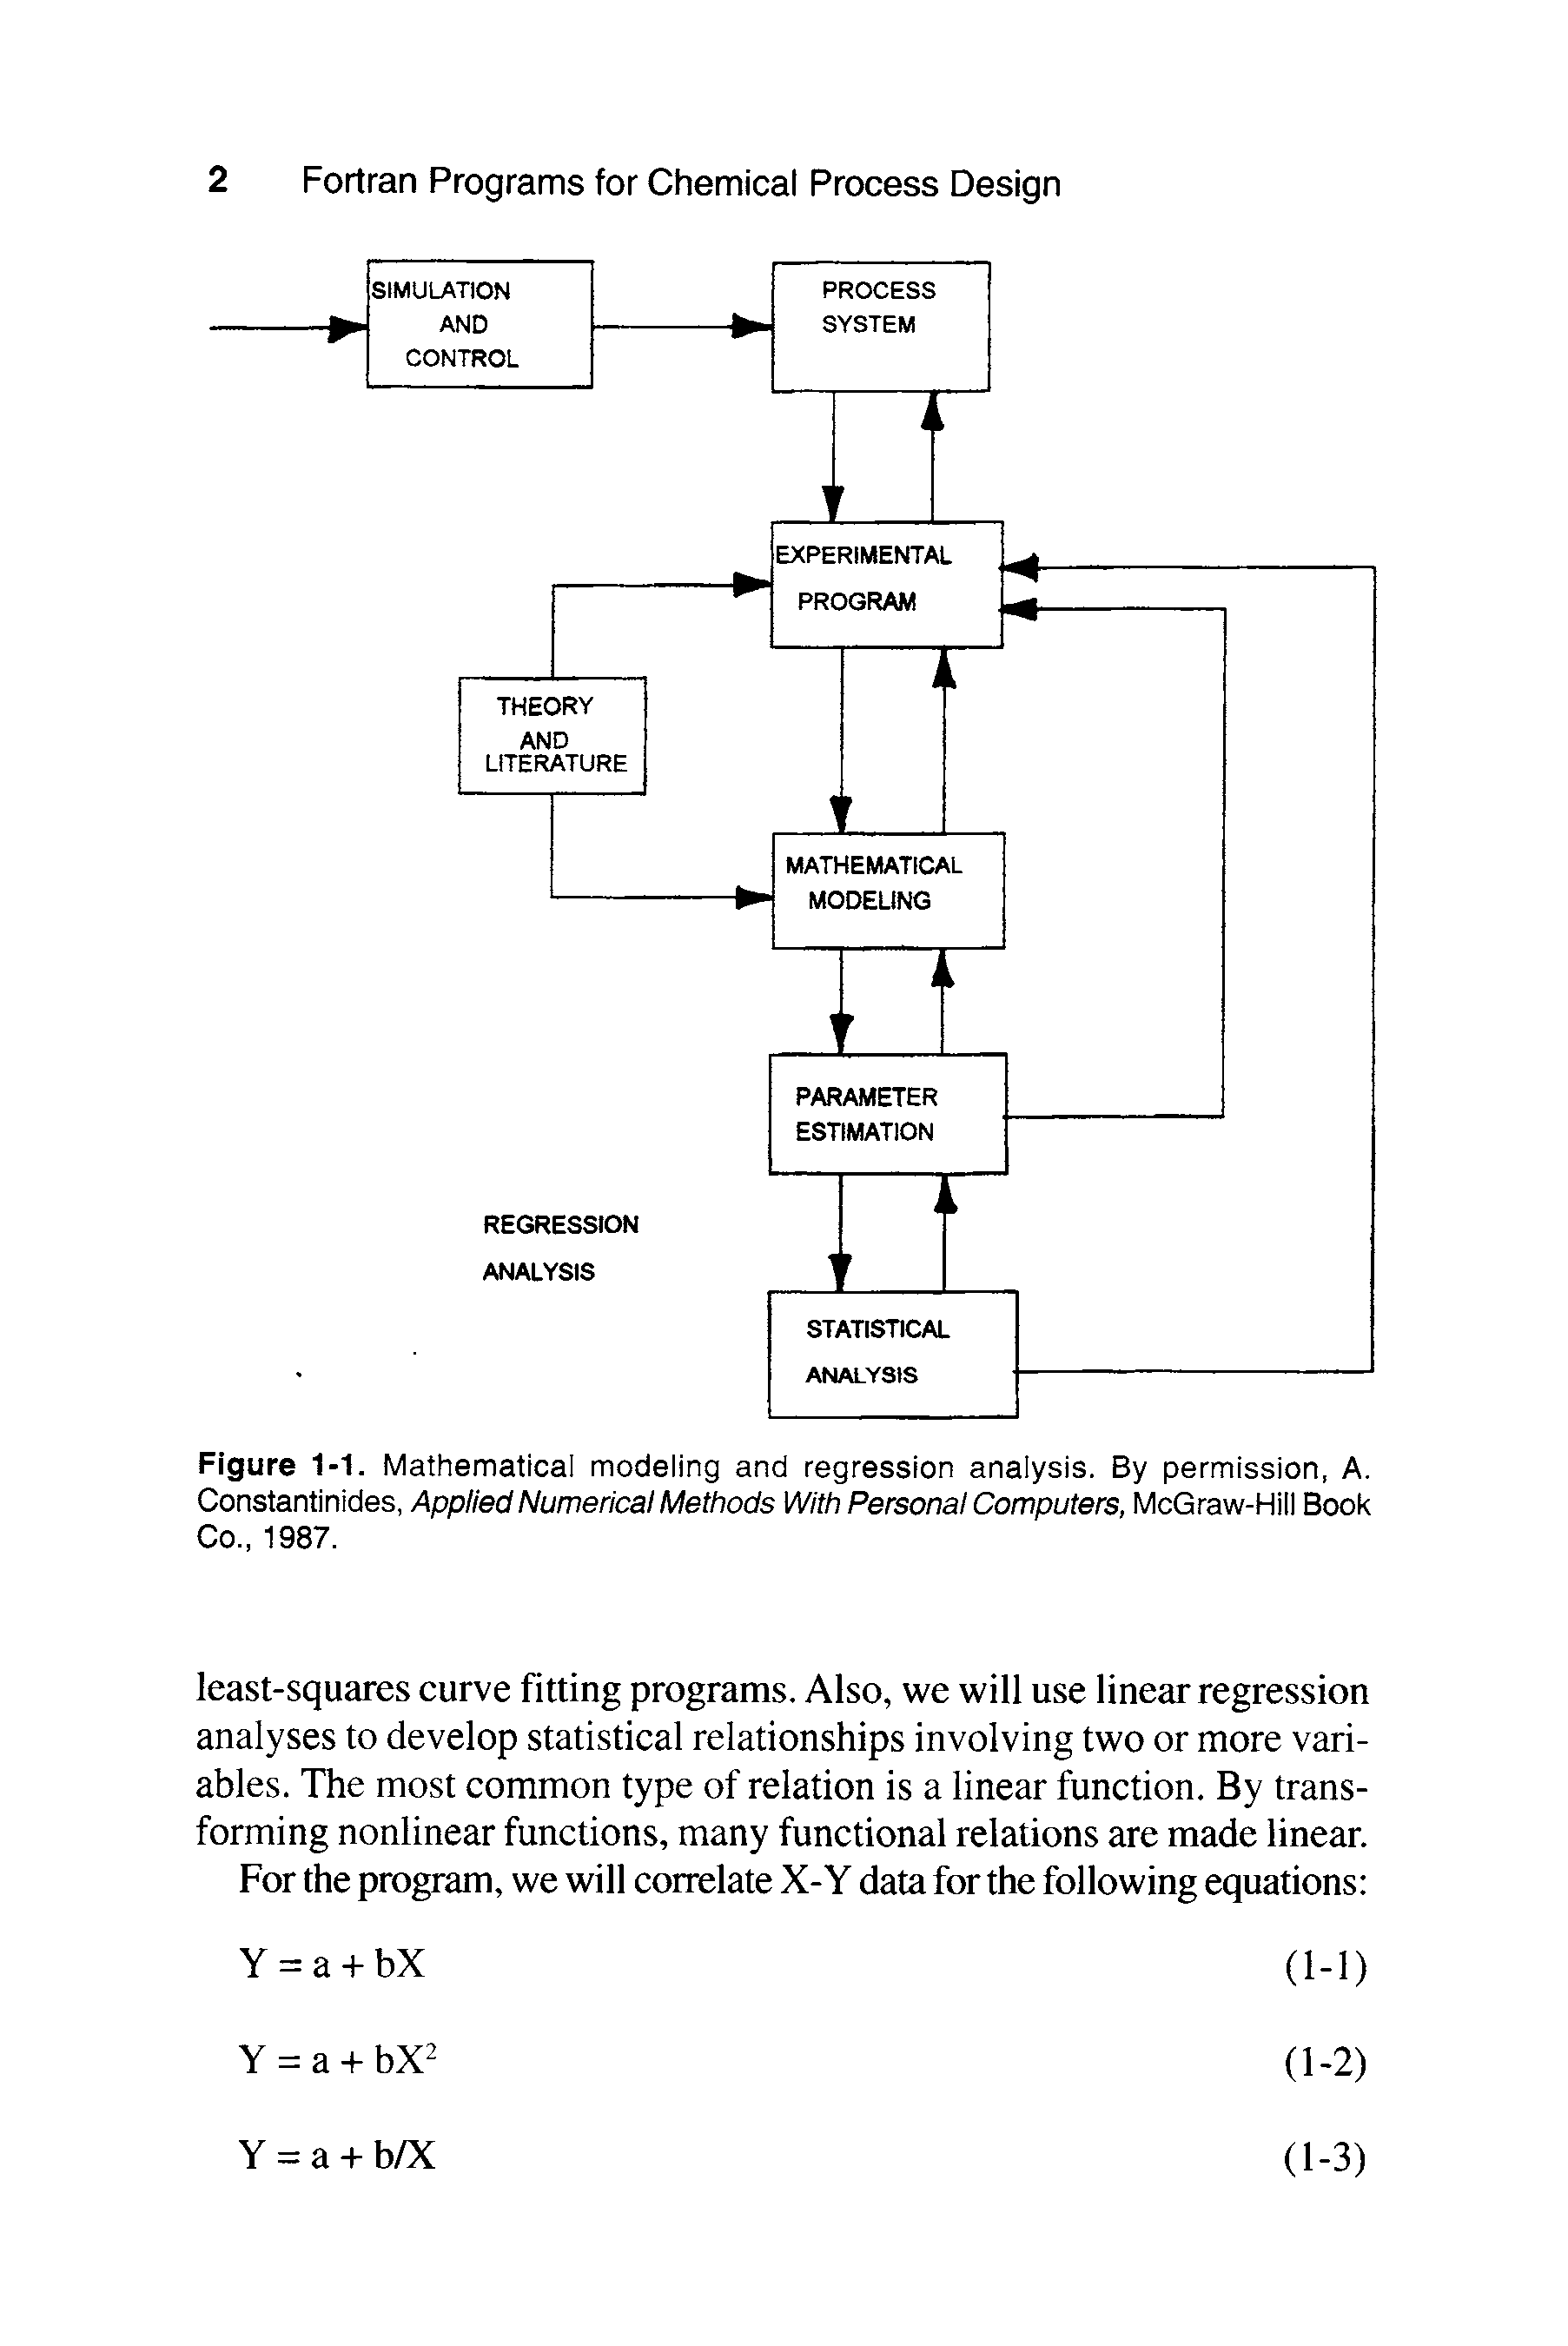 Figure 1-1. Mathematical modeling and regression analysis. By permission, A. Constantinides, Applied Numerical Methods With Personal Computers, McGraw-Hill Book Co., 1987.